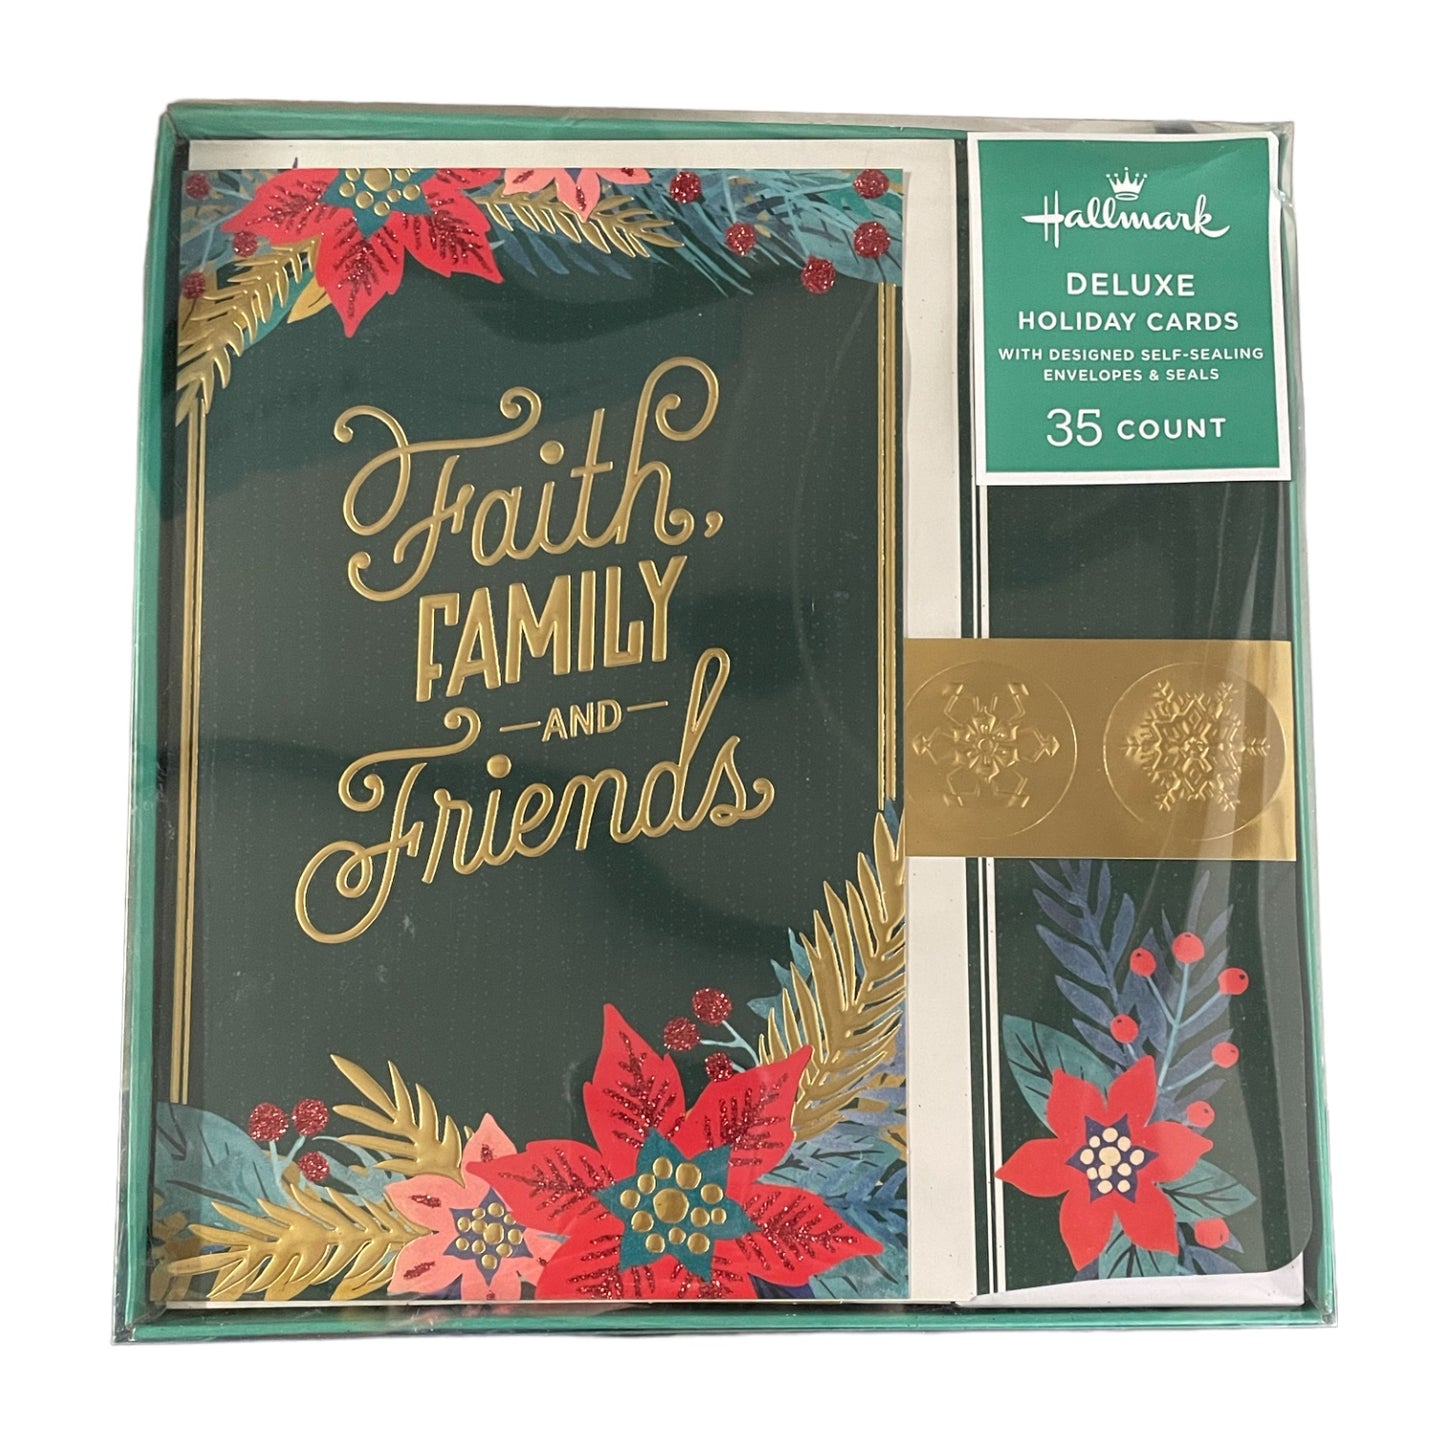 Hallmark Deluxe Holiday Cards, 35 Count, Faith Family and Friends, Green and Red